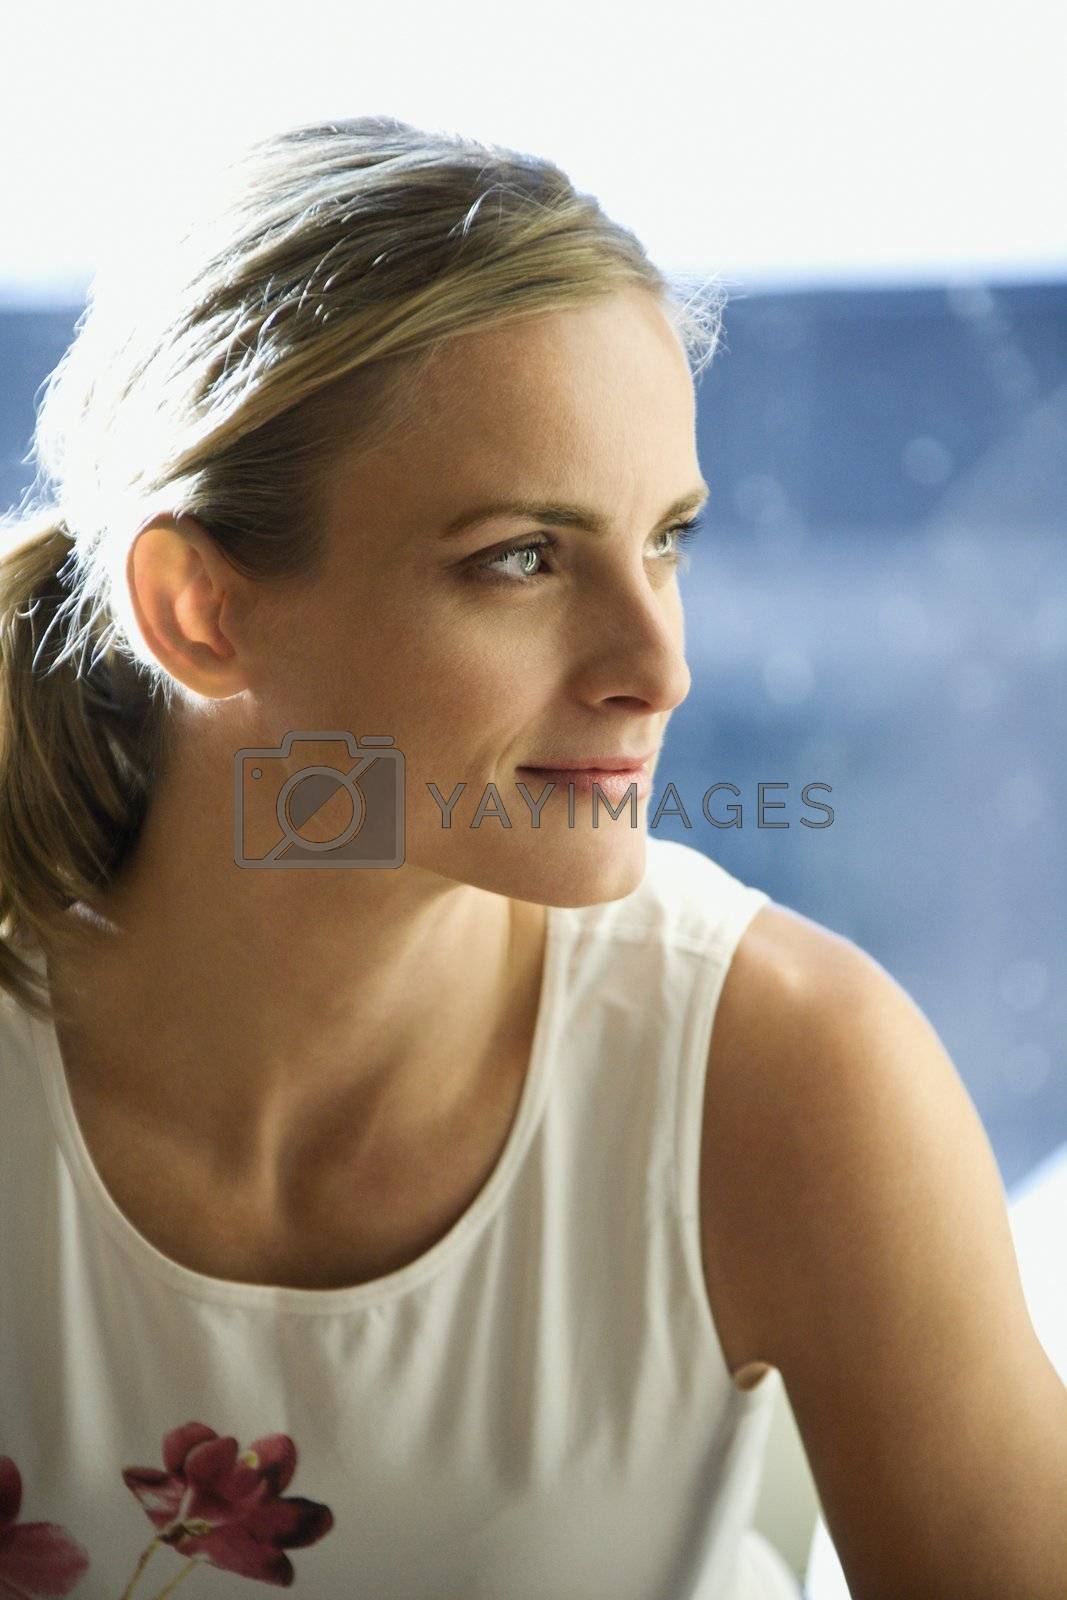 Royalty free image of Portrait of woman. by iofoto